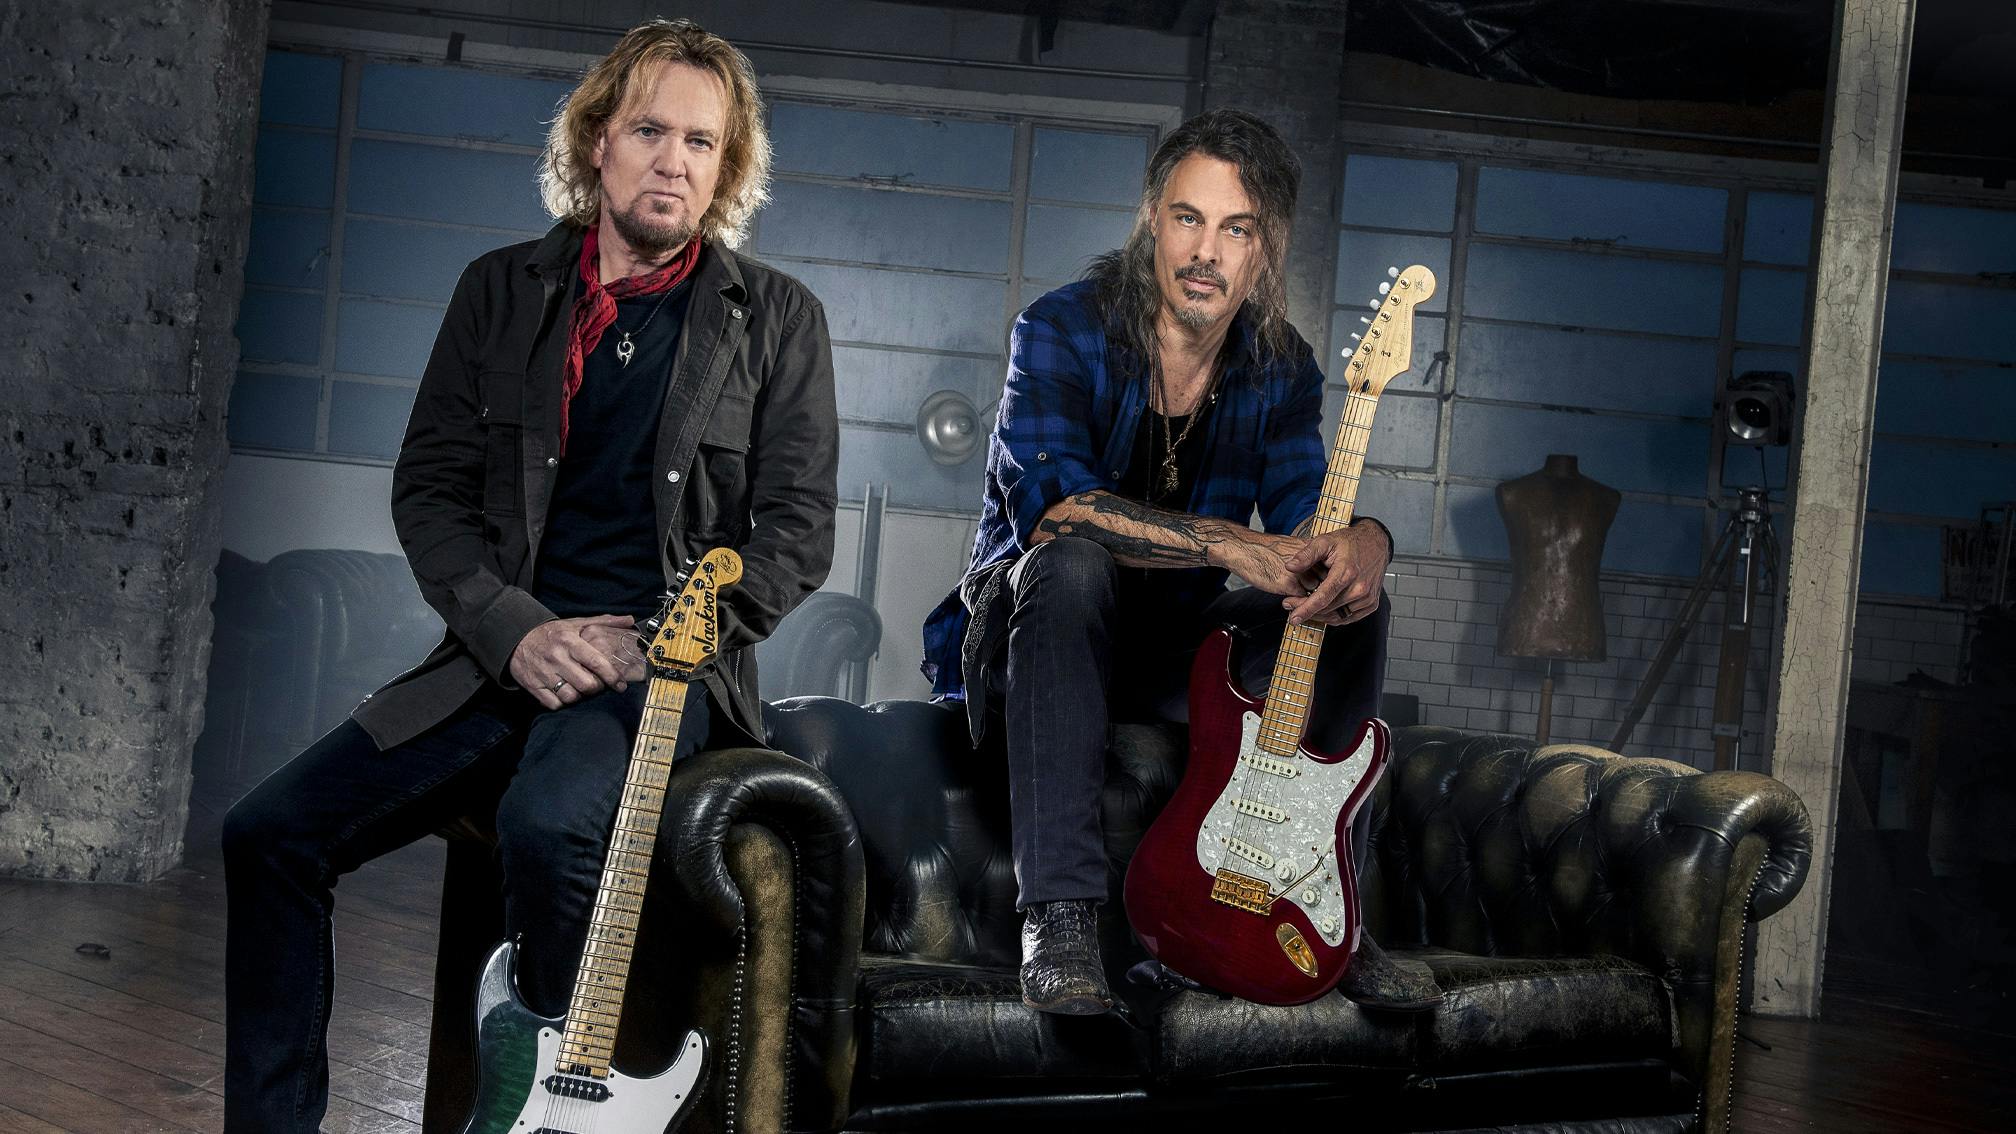 Iron Maiden's Adrian Smith announces new project with Richie Kotzen, releases debut single